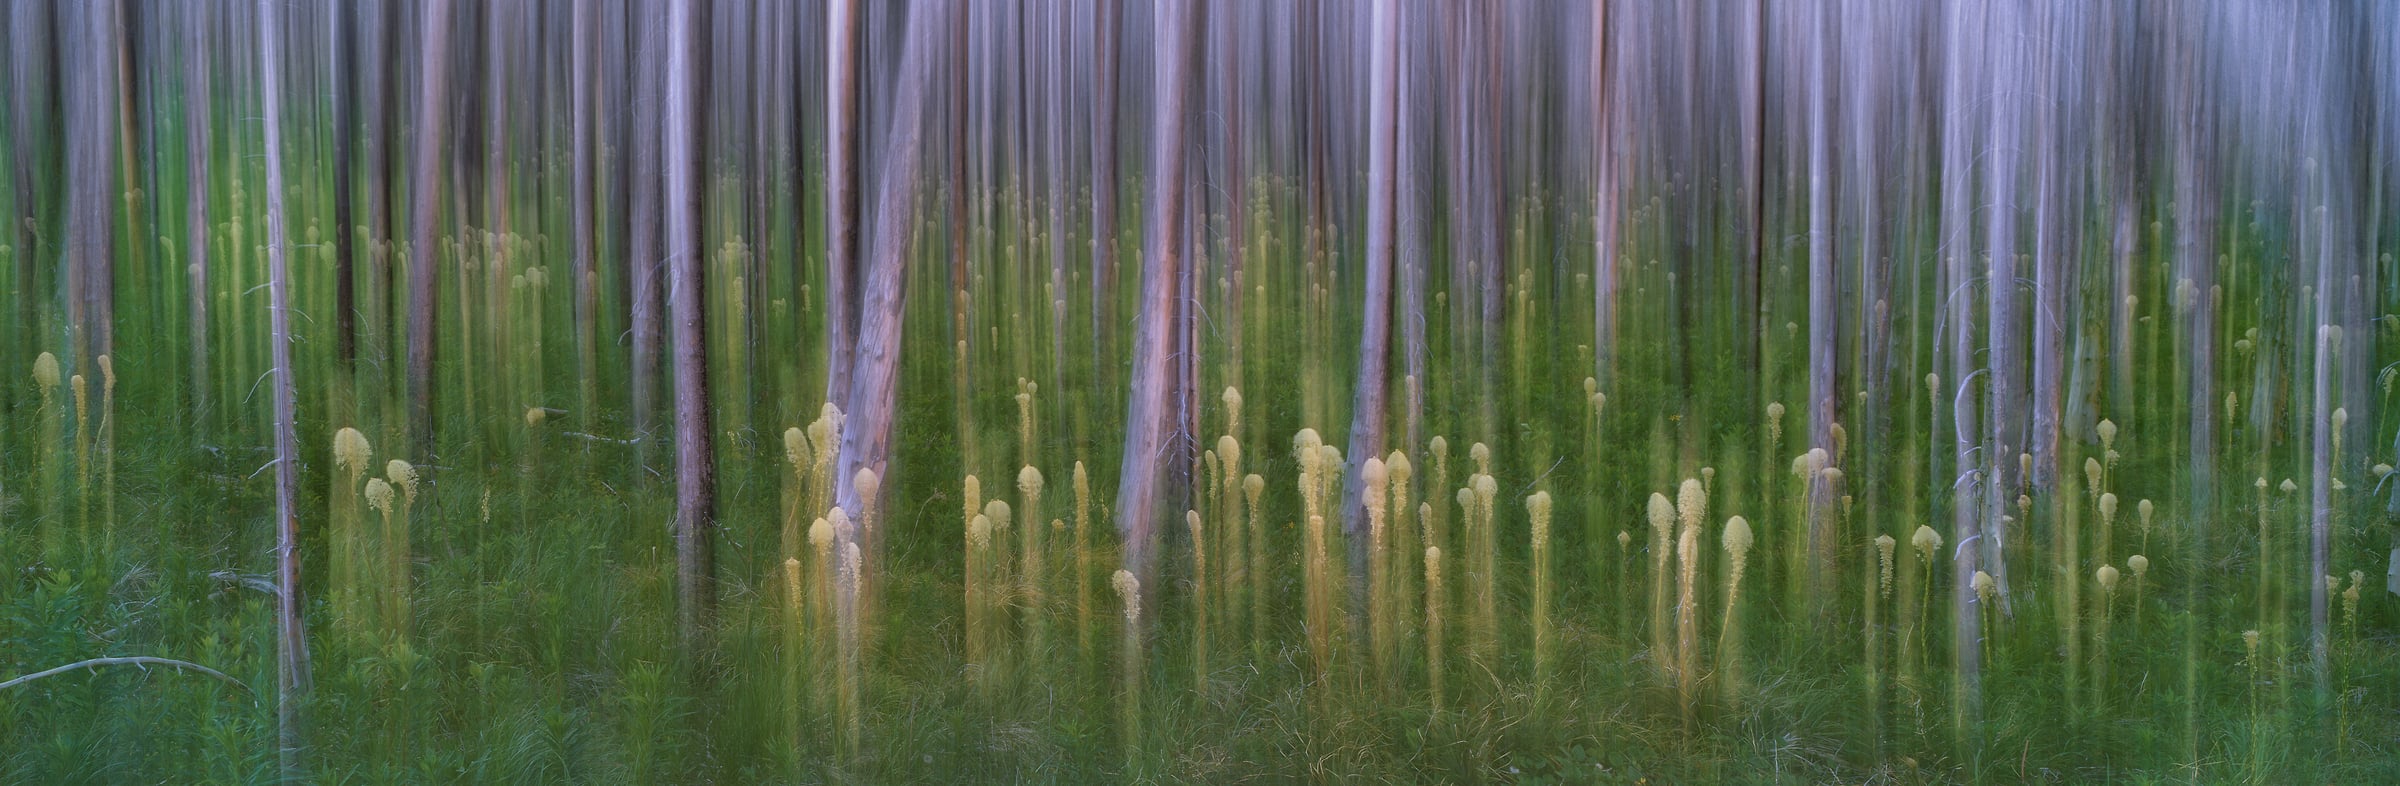 328 megapixels! A very high resolution, large-format VAST photo print of a dreamy abstract forest scene; fine art photograph created by Scott Dimond in Waterton National Park, Alberta, Canada